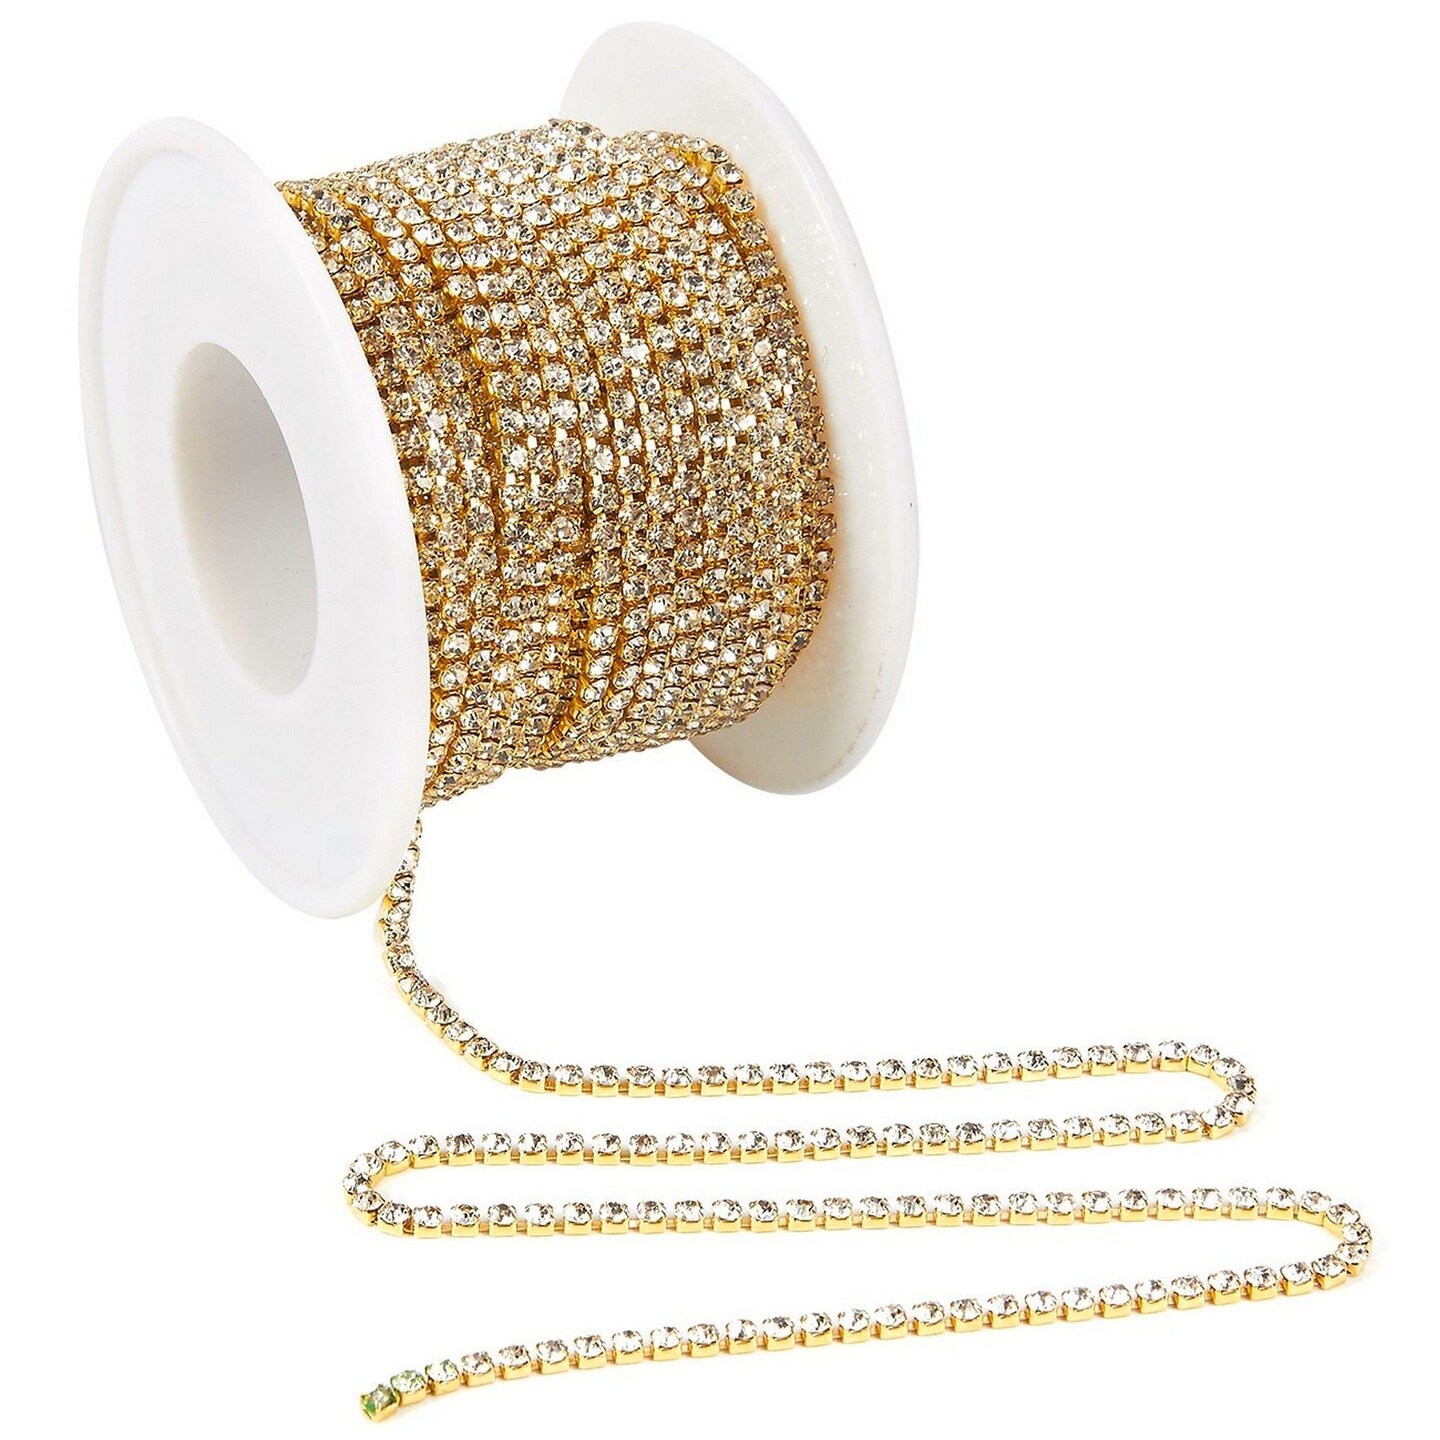 Crystal Rhinestone with Gold Chain for Sewing and Crafts, 5 Rows (4 mm, 3 Yards)